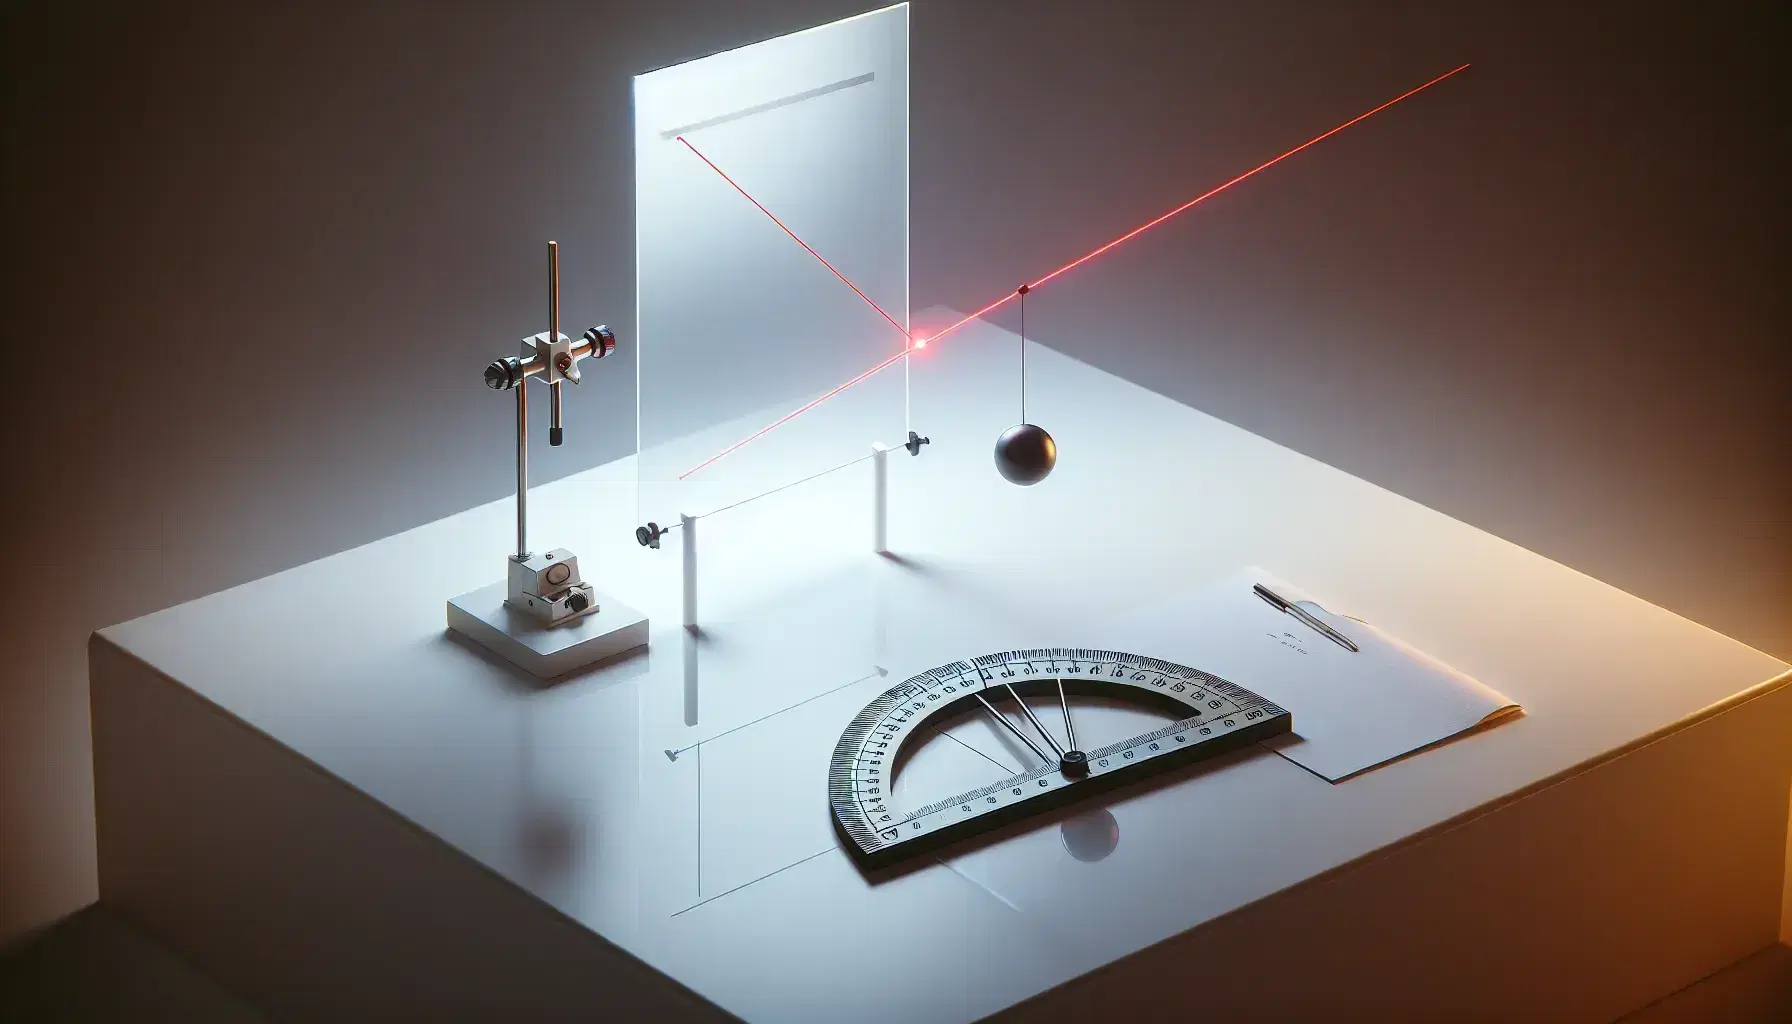 Laser beam experiment setup on a white table with a protractor and a stationary spherical pendulum in a blurred laboratory background.